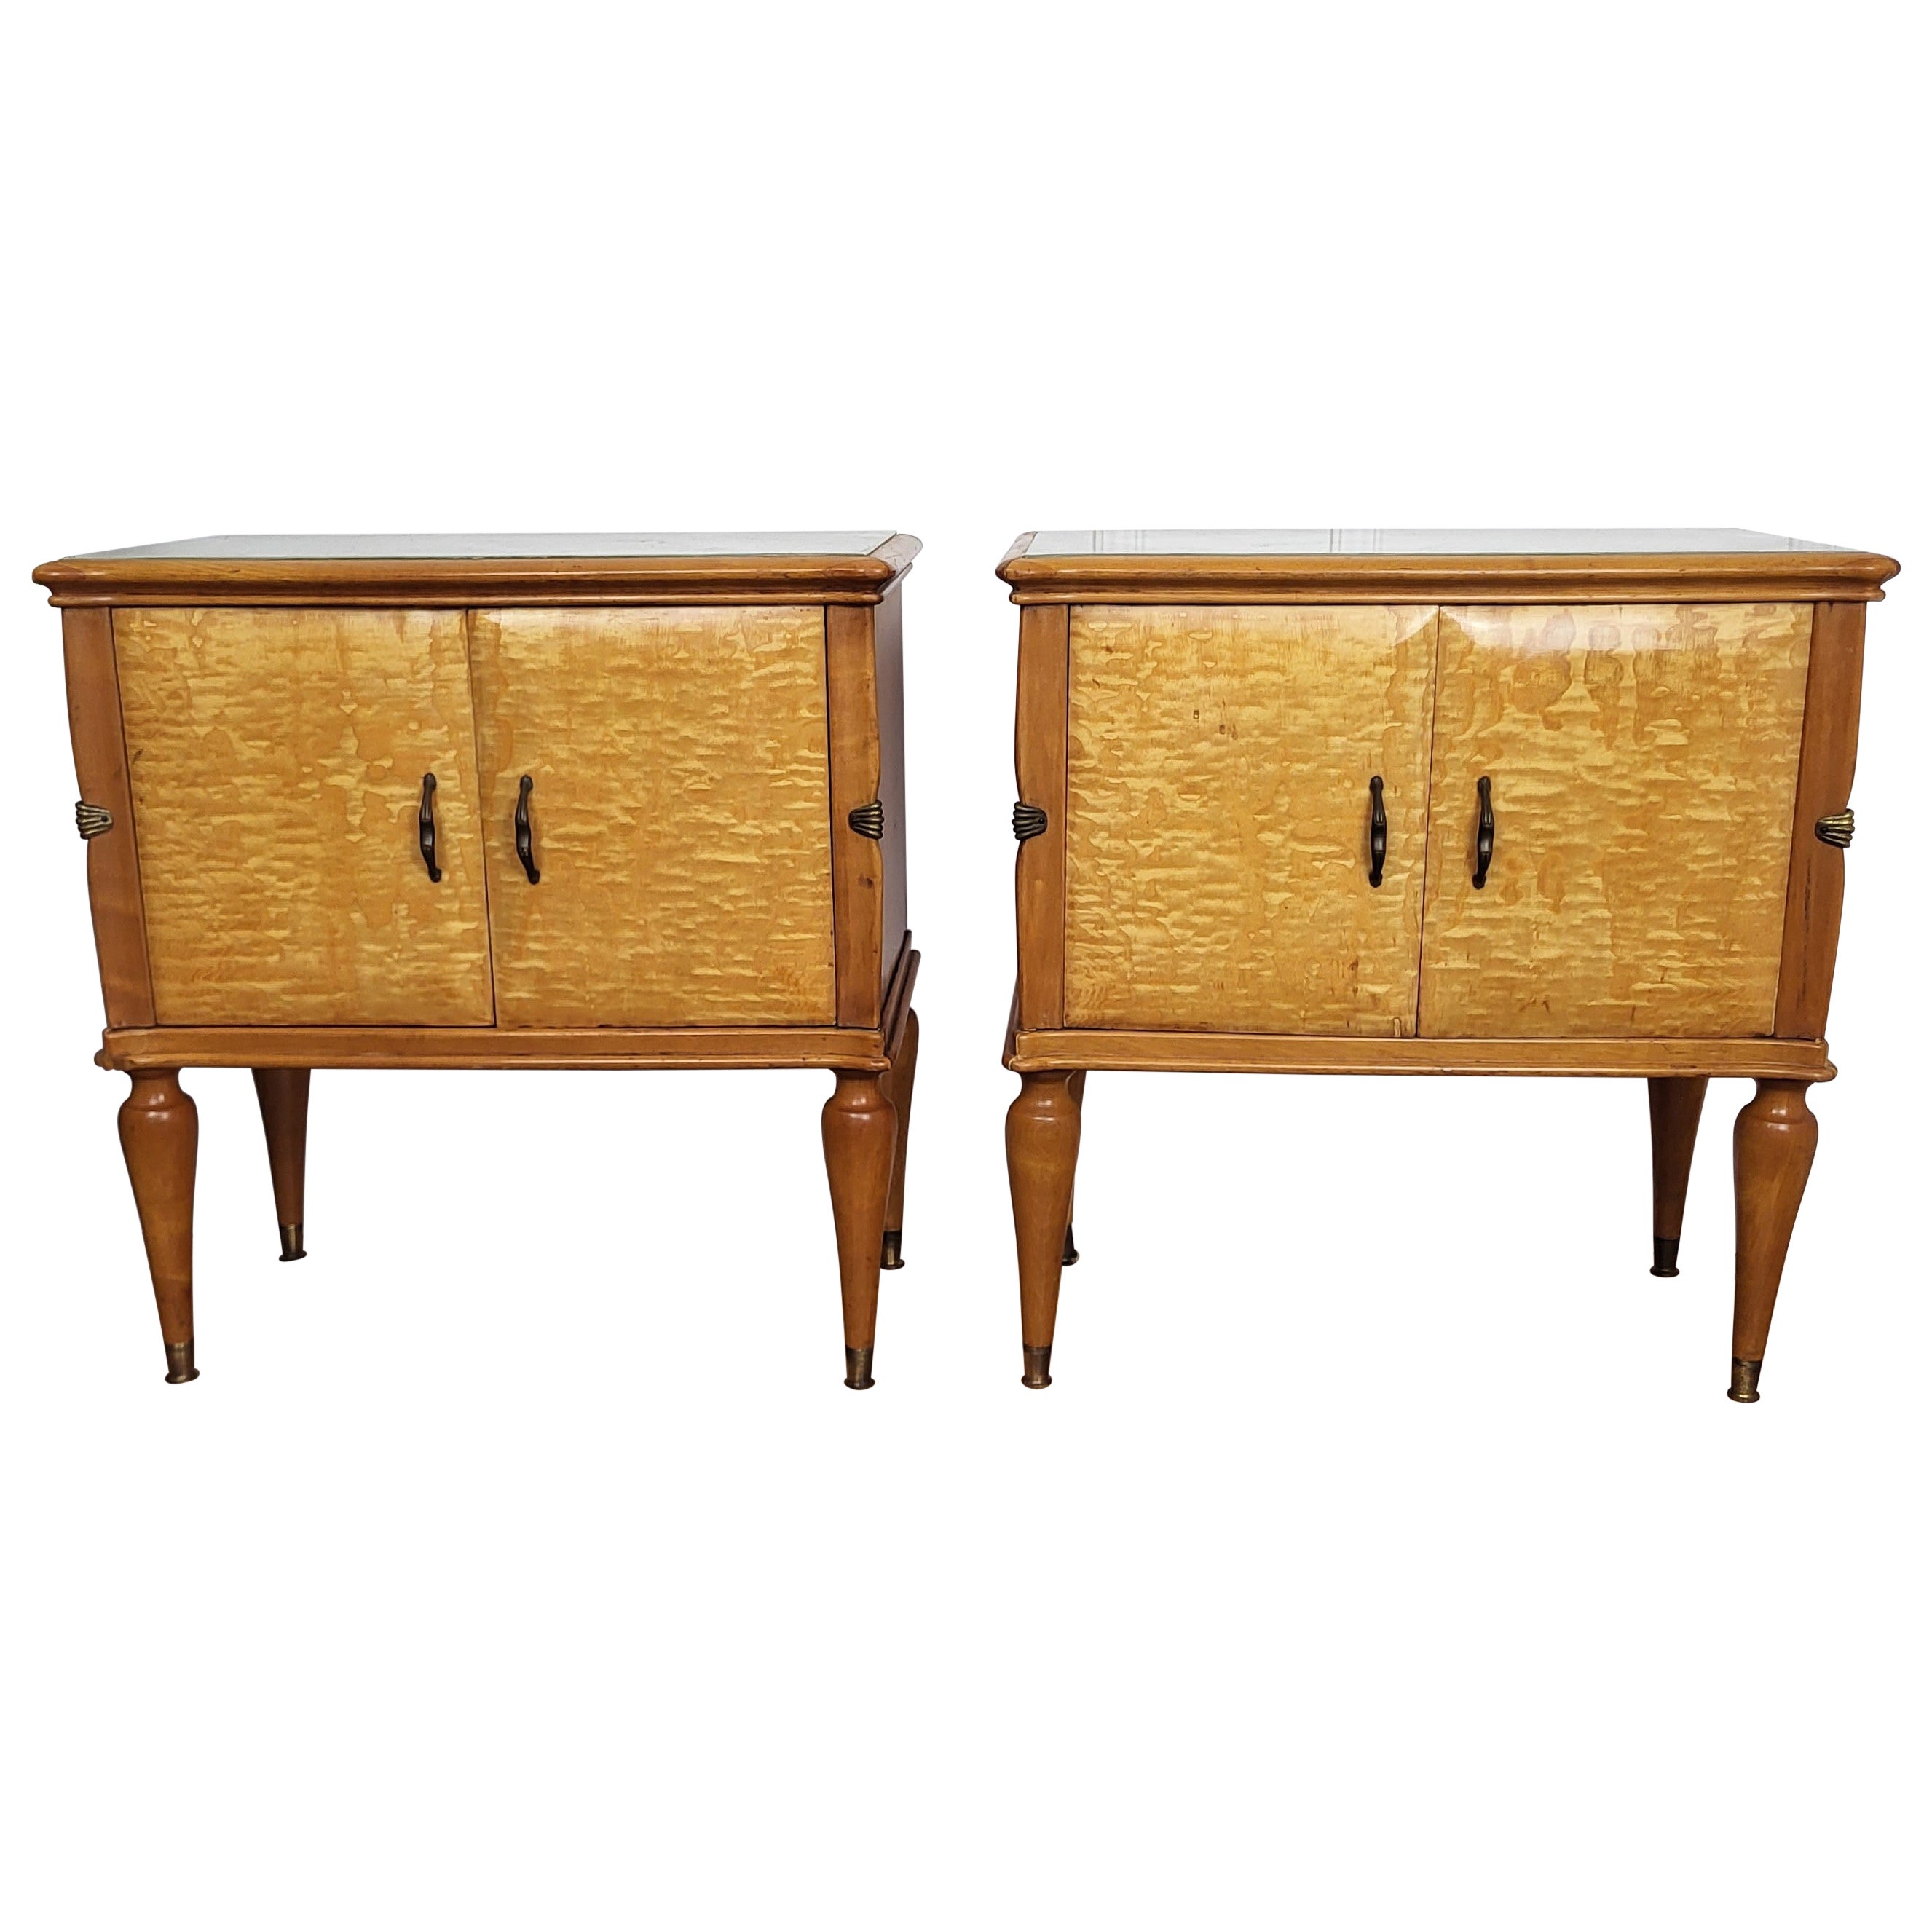 Pair of Italian Mid-Century Modern Nightstands Bedside Tables Maple & Glass Top